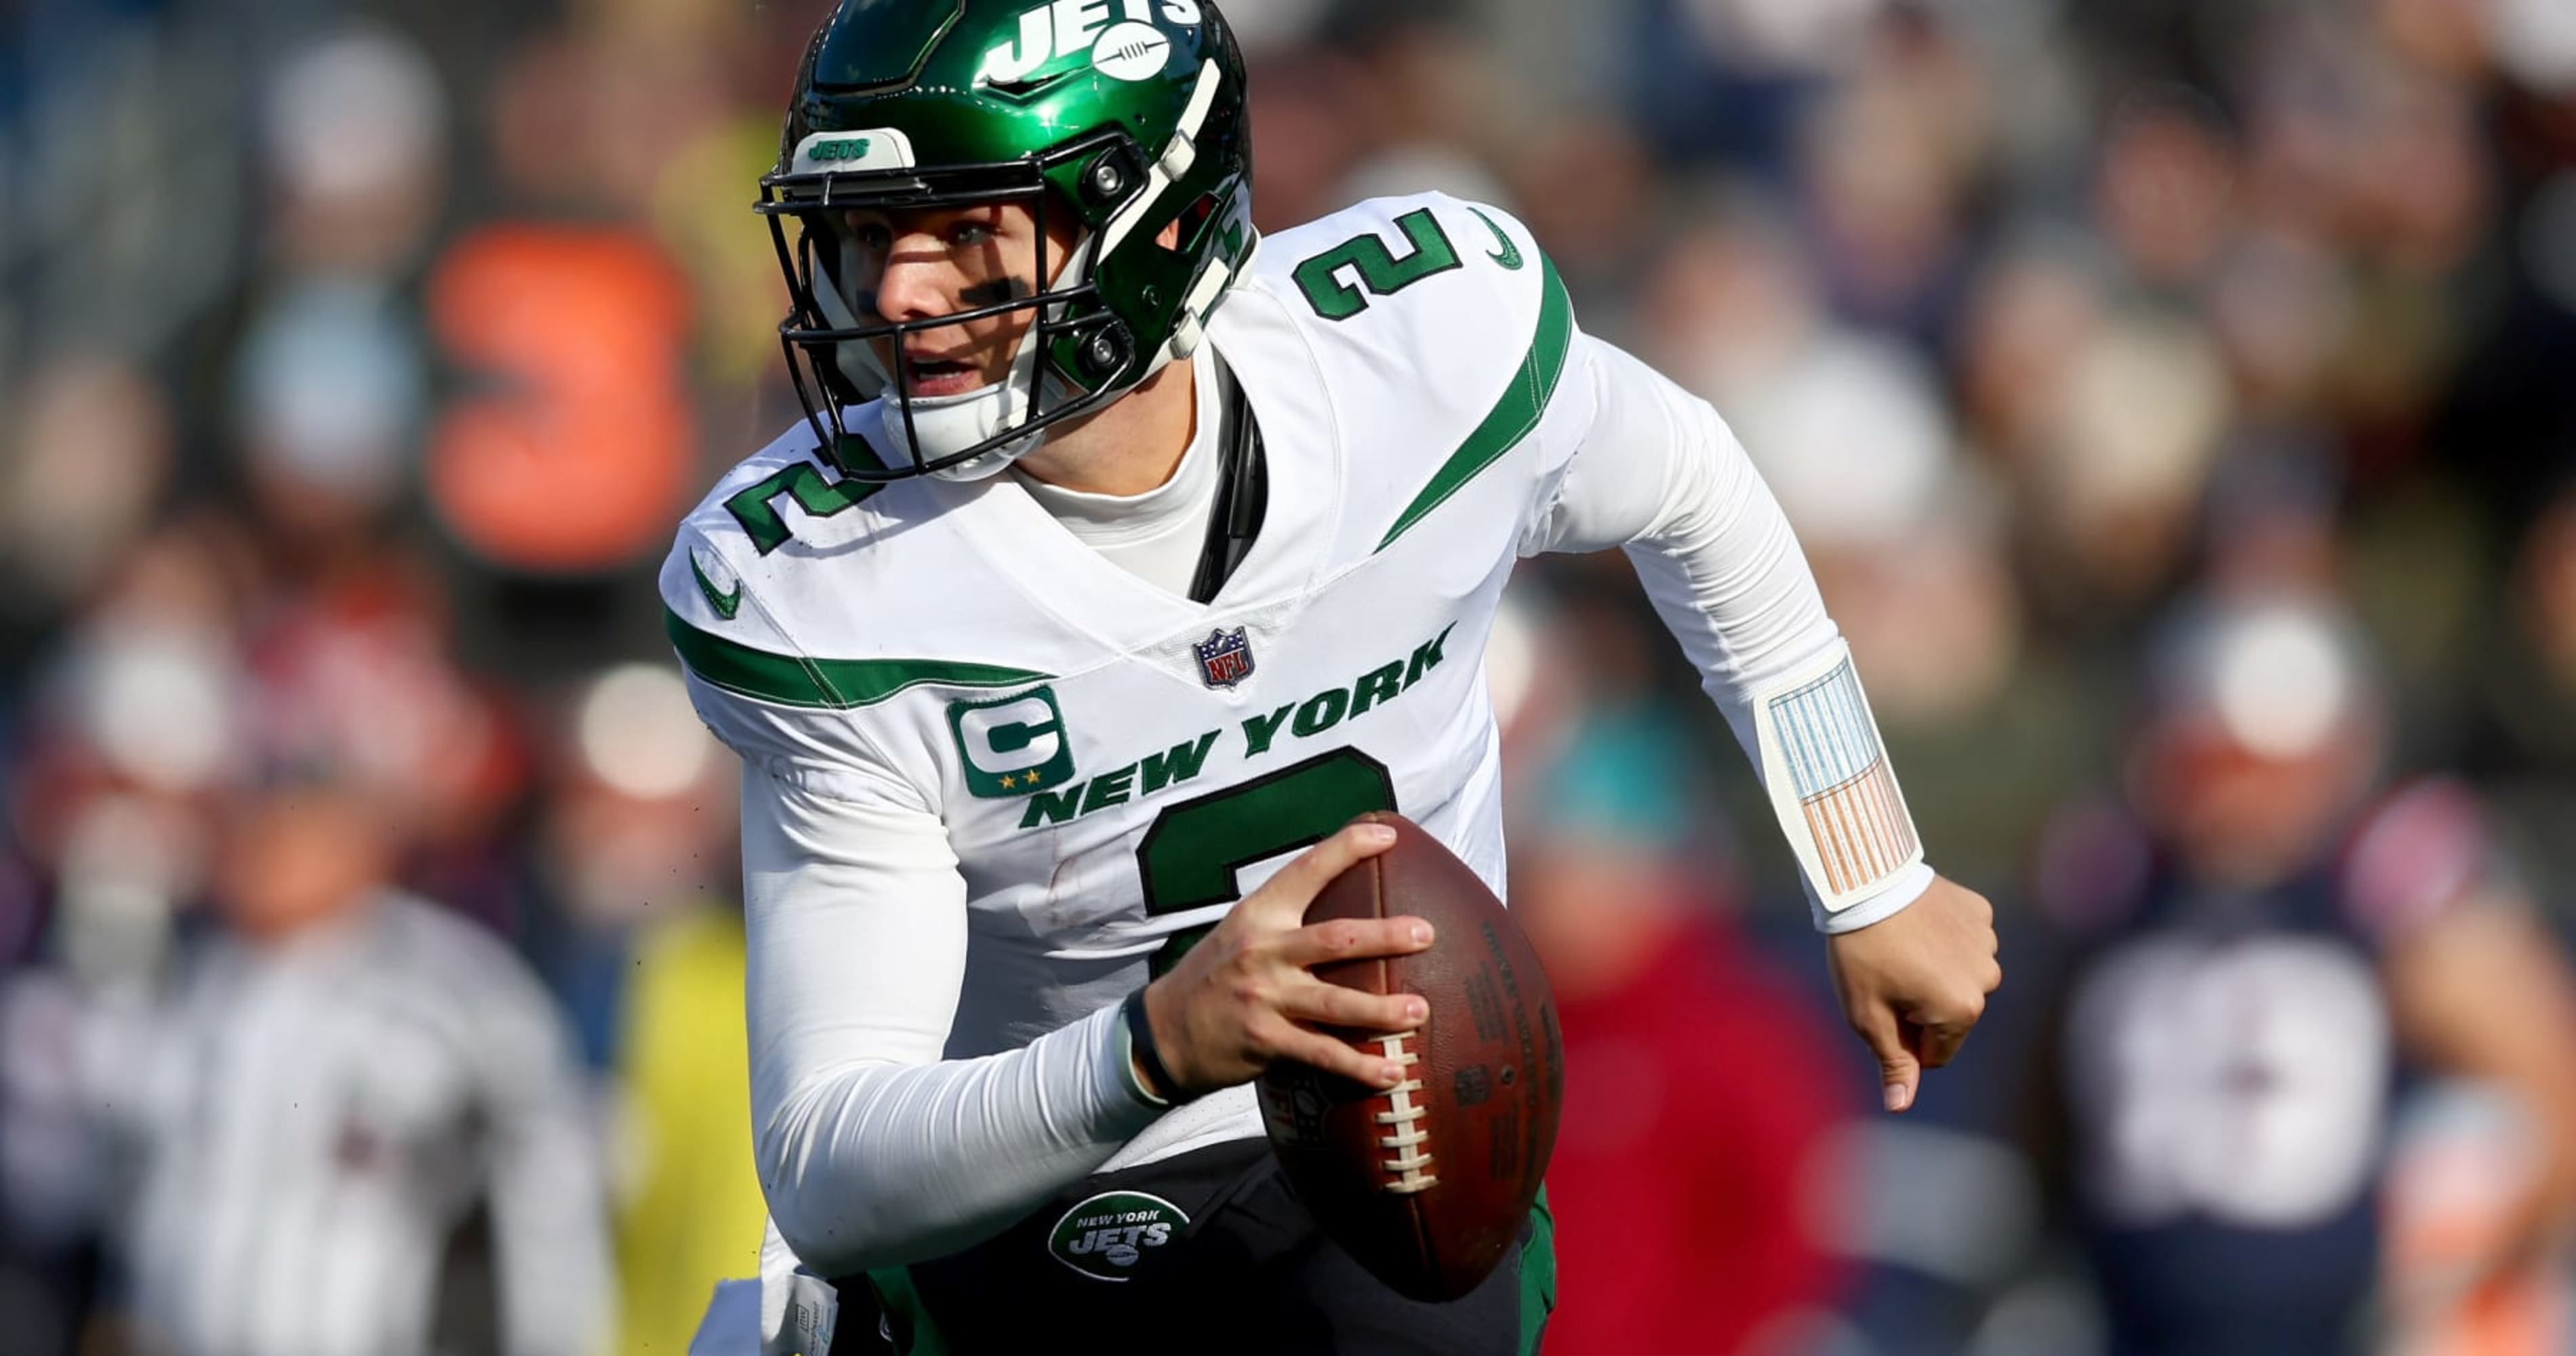 Jets' Zach Wilson Benched, Mike White Will Start at QB vs. Bears